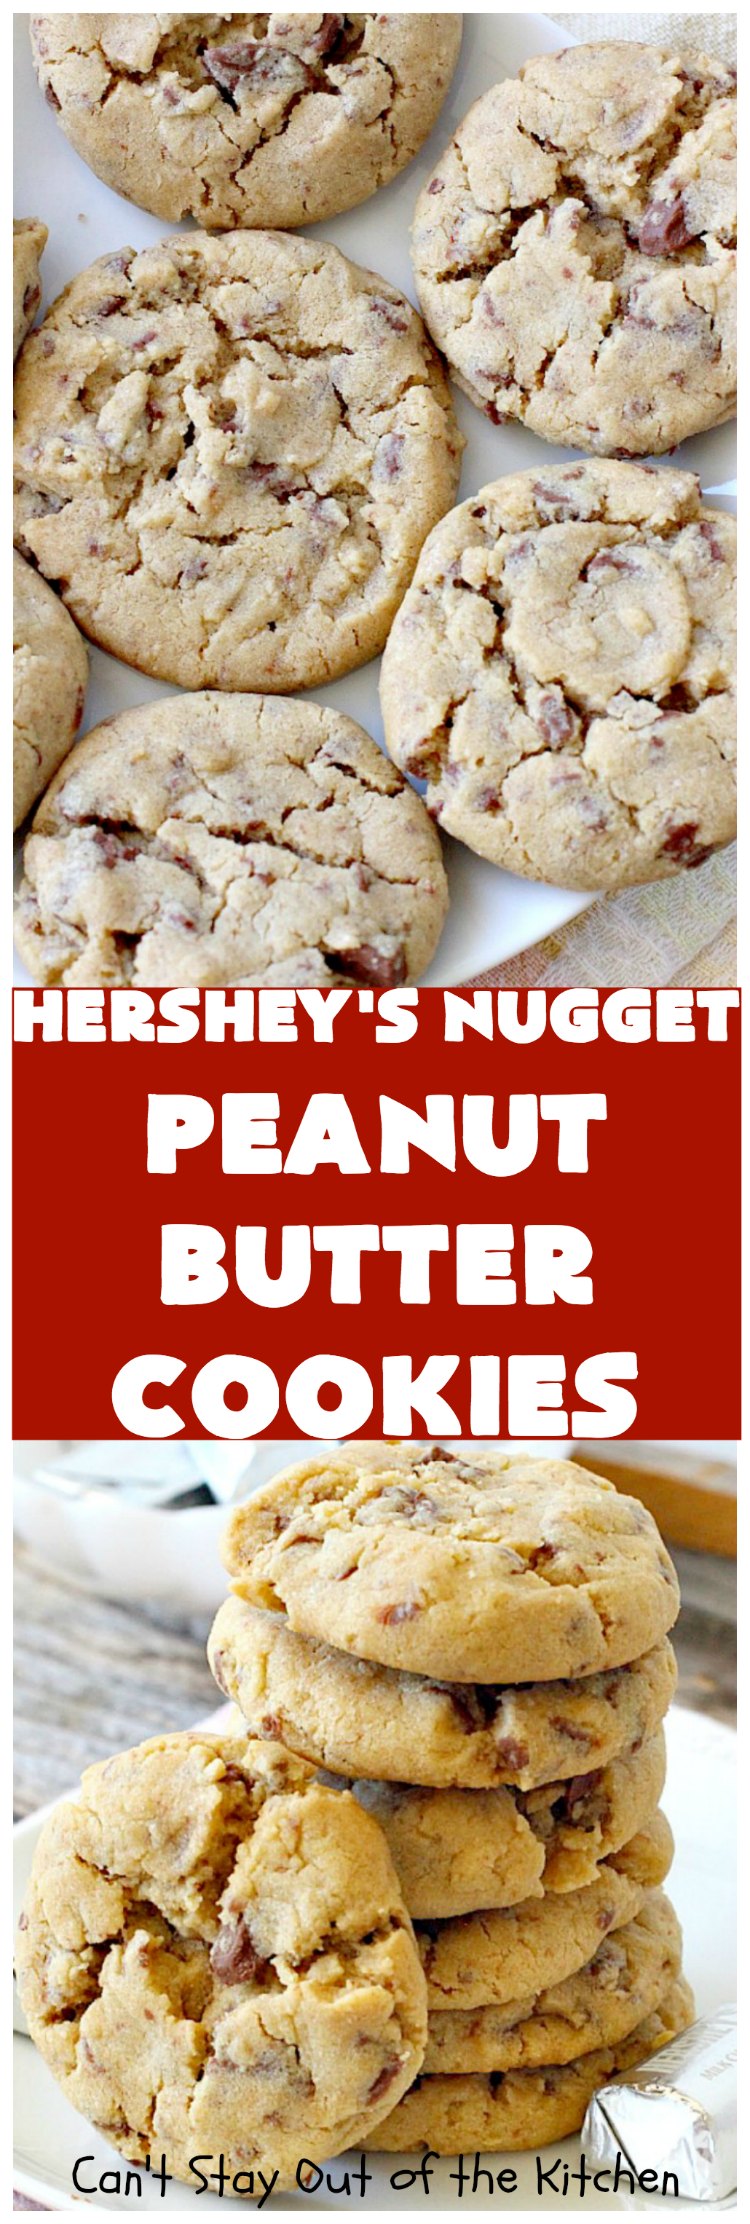 Hershey's Nugget Peanut Butter Cookies | Can't Stay Out of the Kitchen